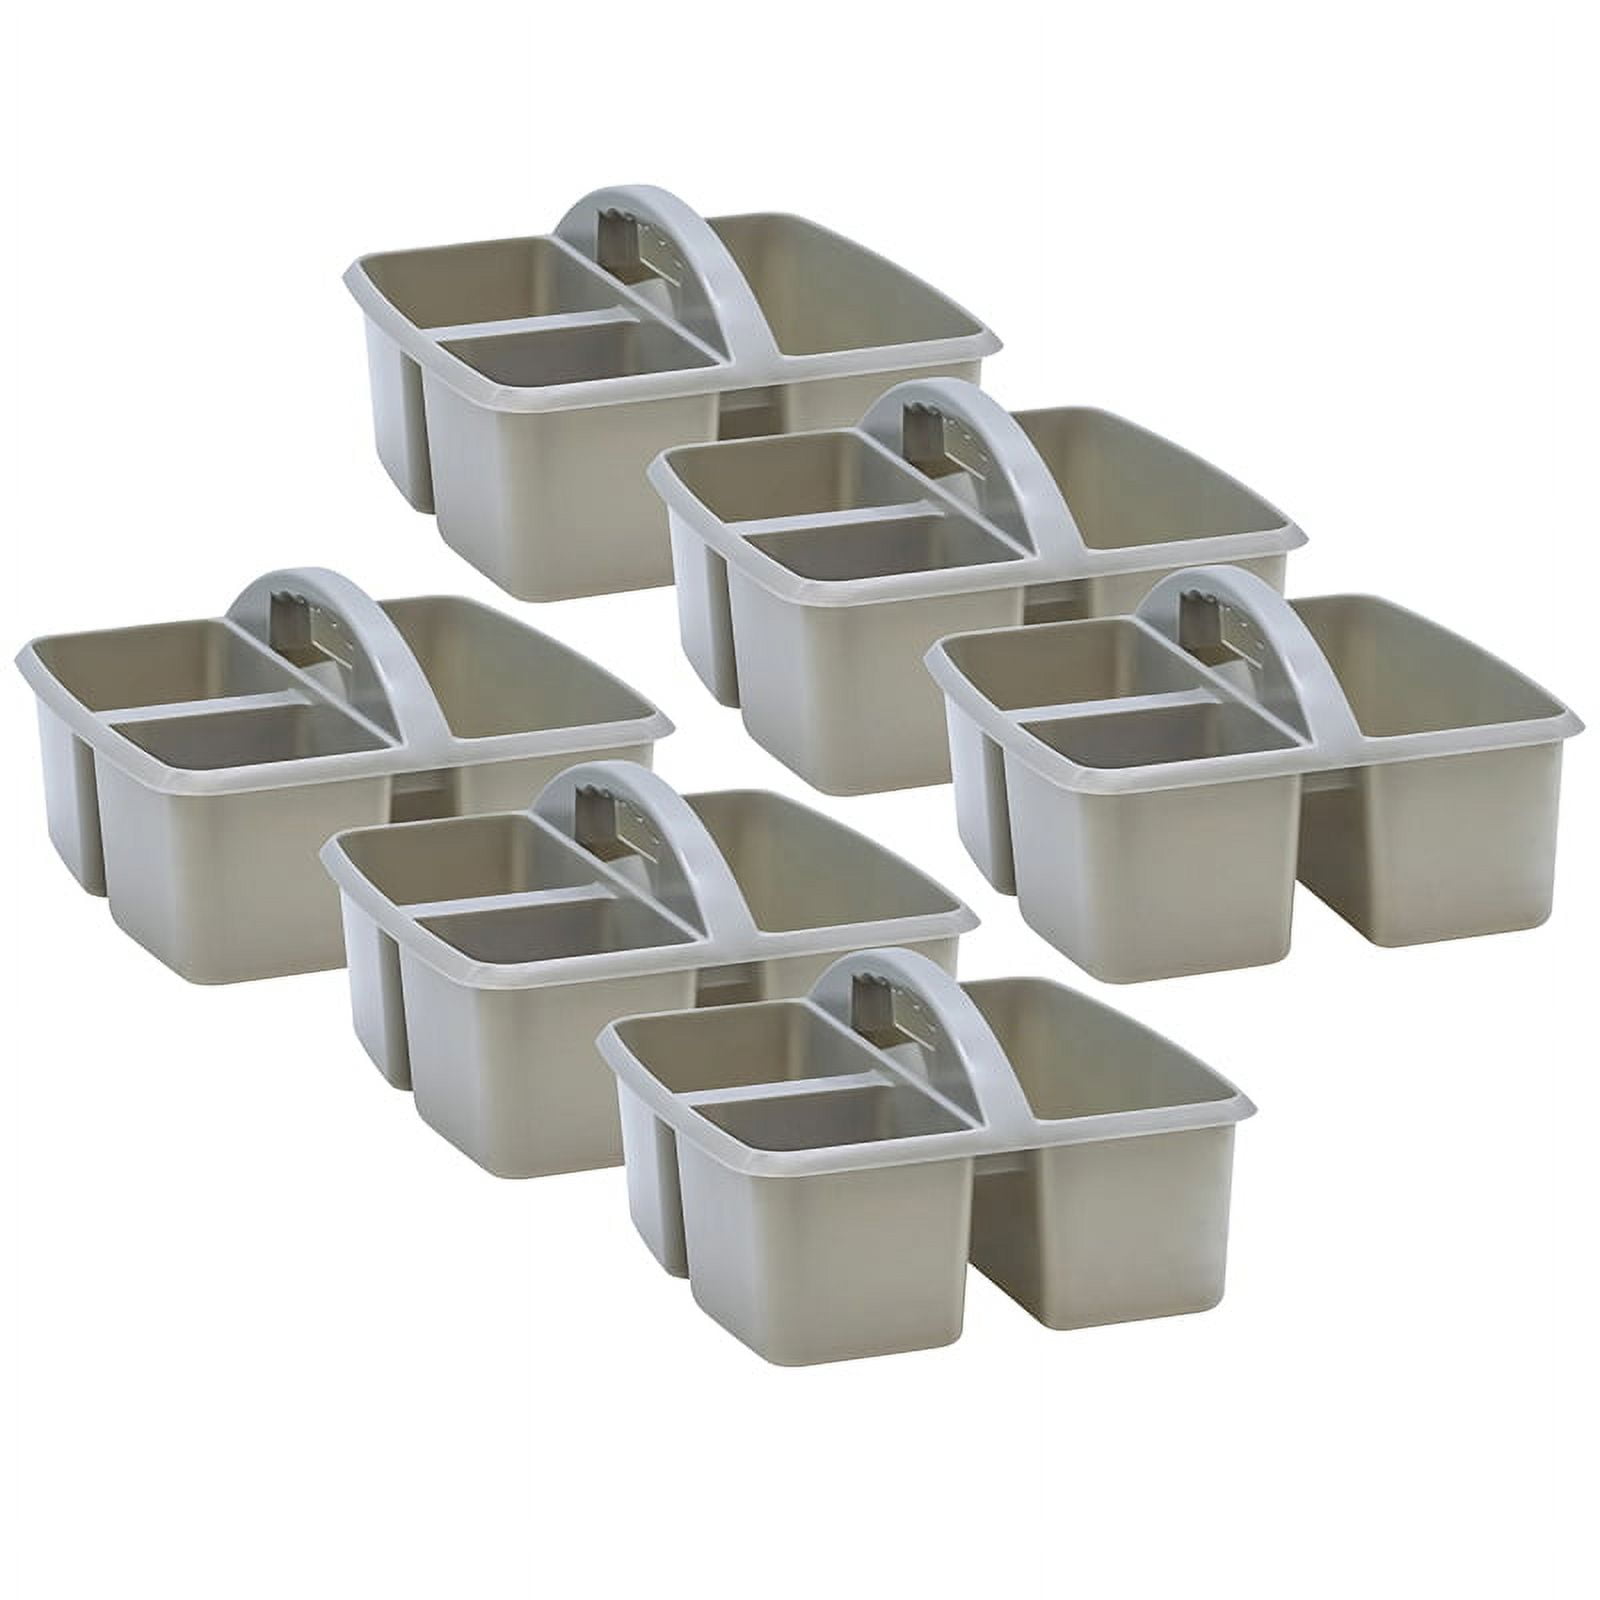 GnHoCh 6-Pack Plastic Storage Caddy, Cleaning Caddy with Handle, Gray